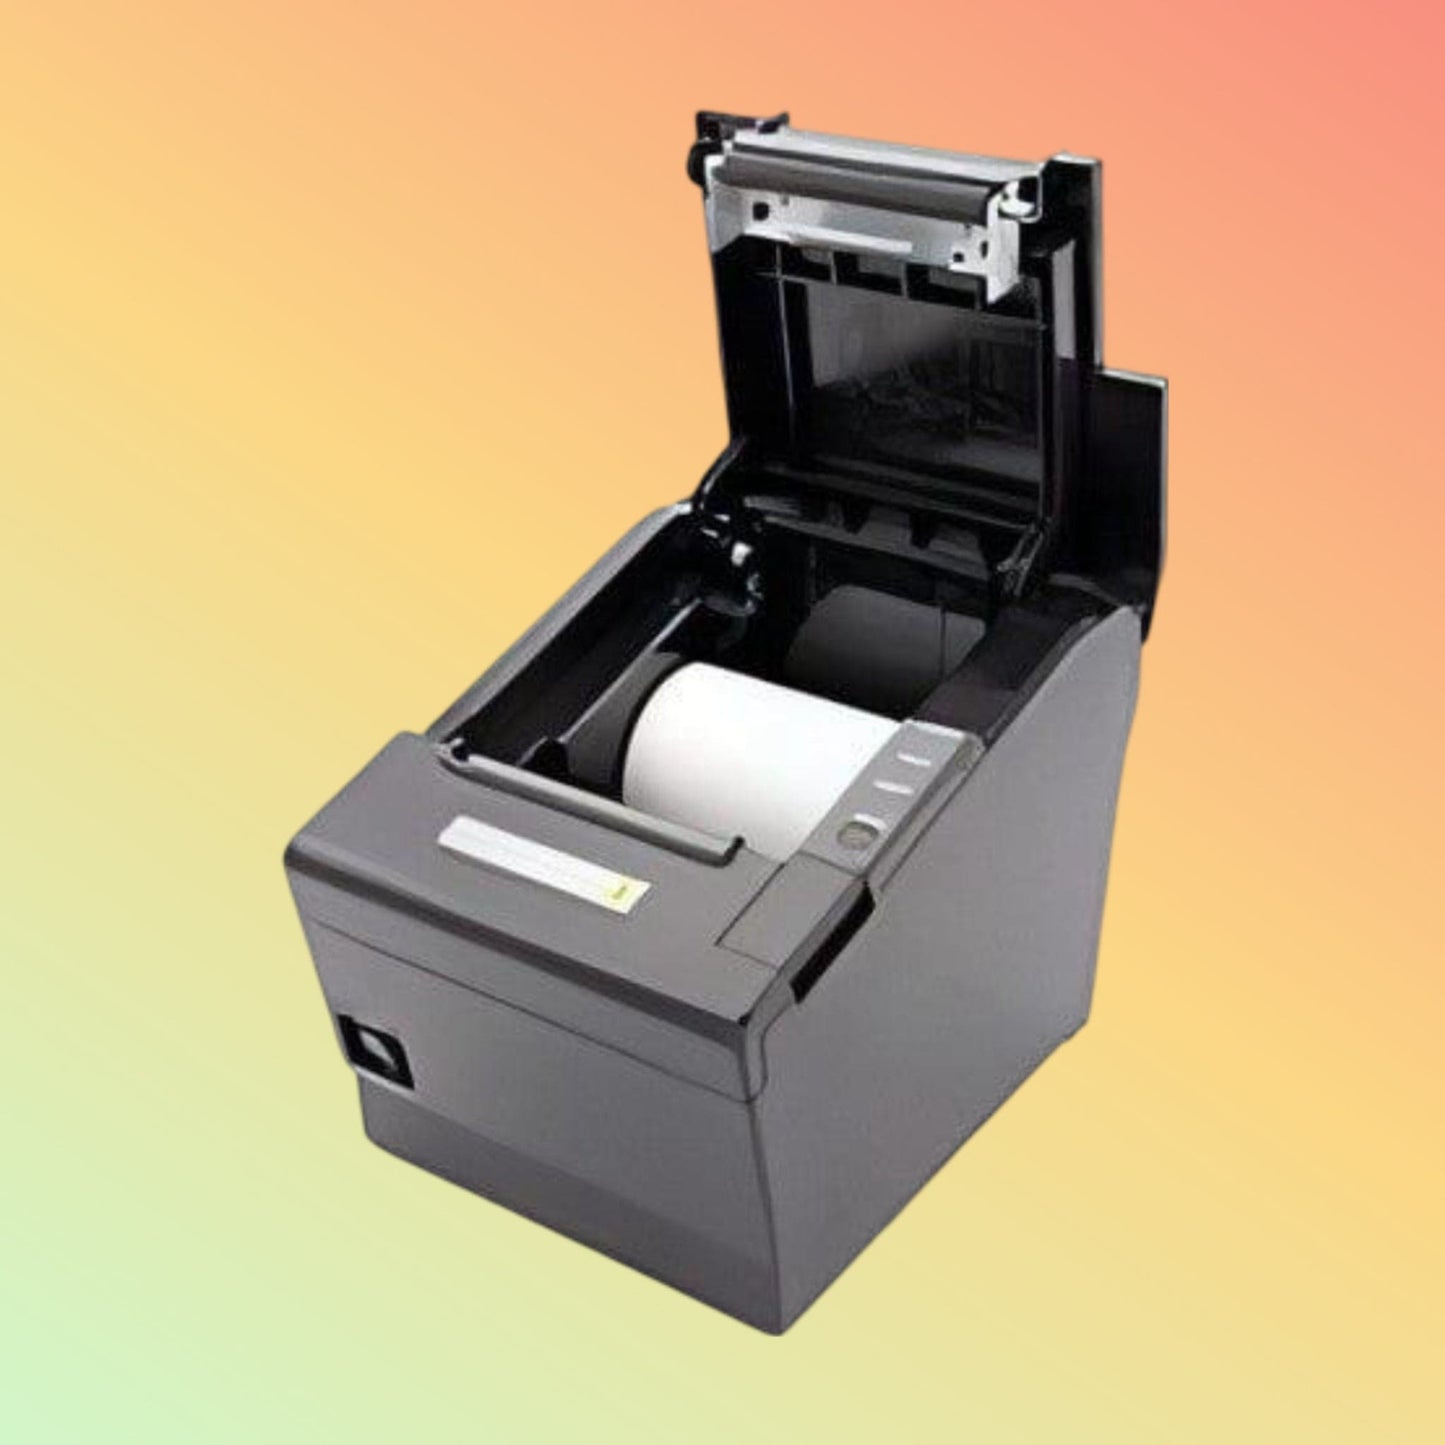 "Postech PT-R88VI durable receipt printer with multilingual support, designed for efficient retail and hospitality use."